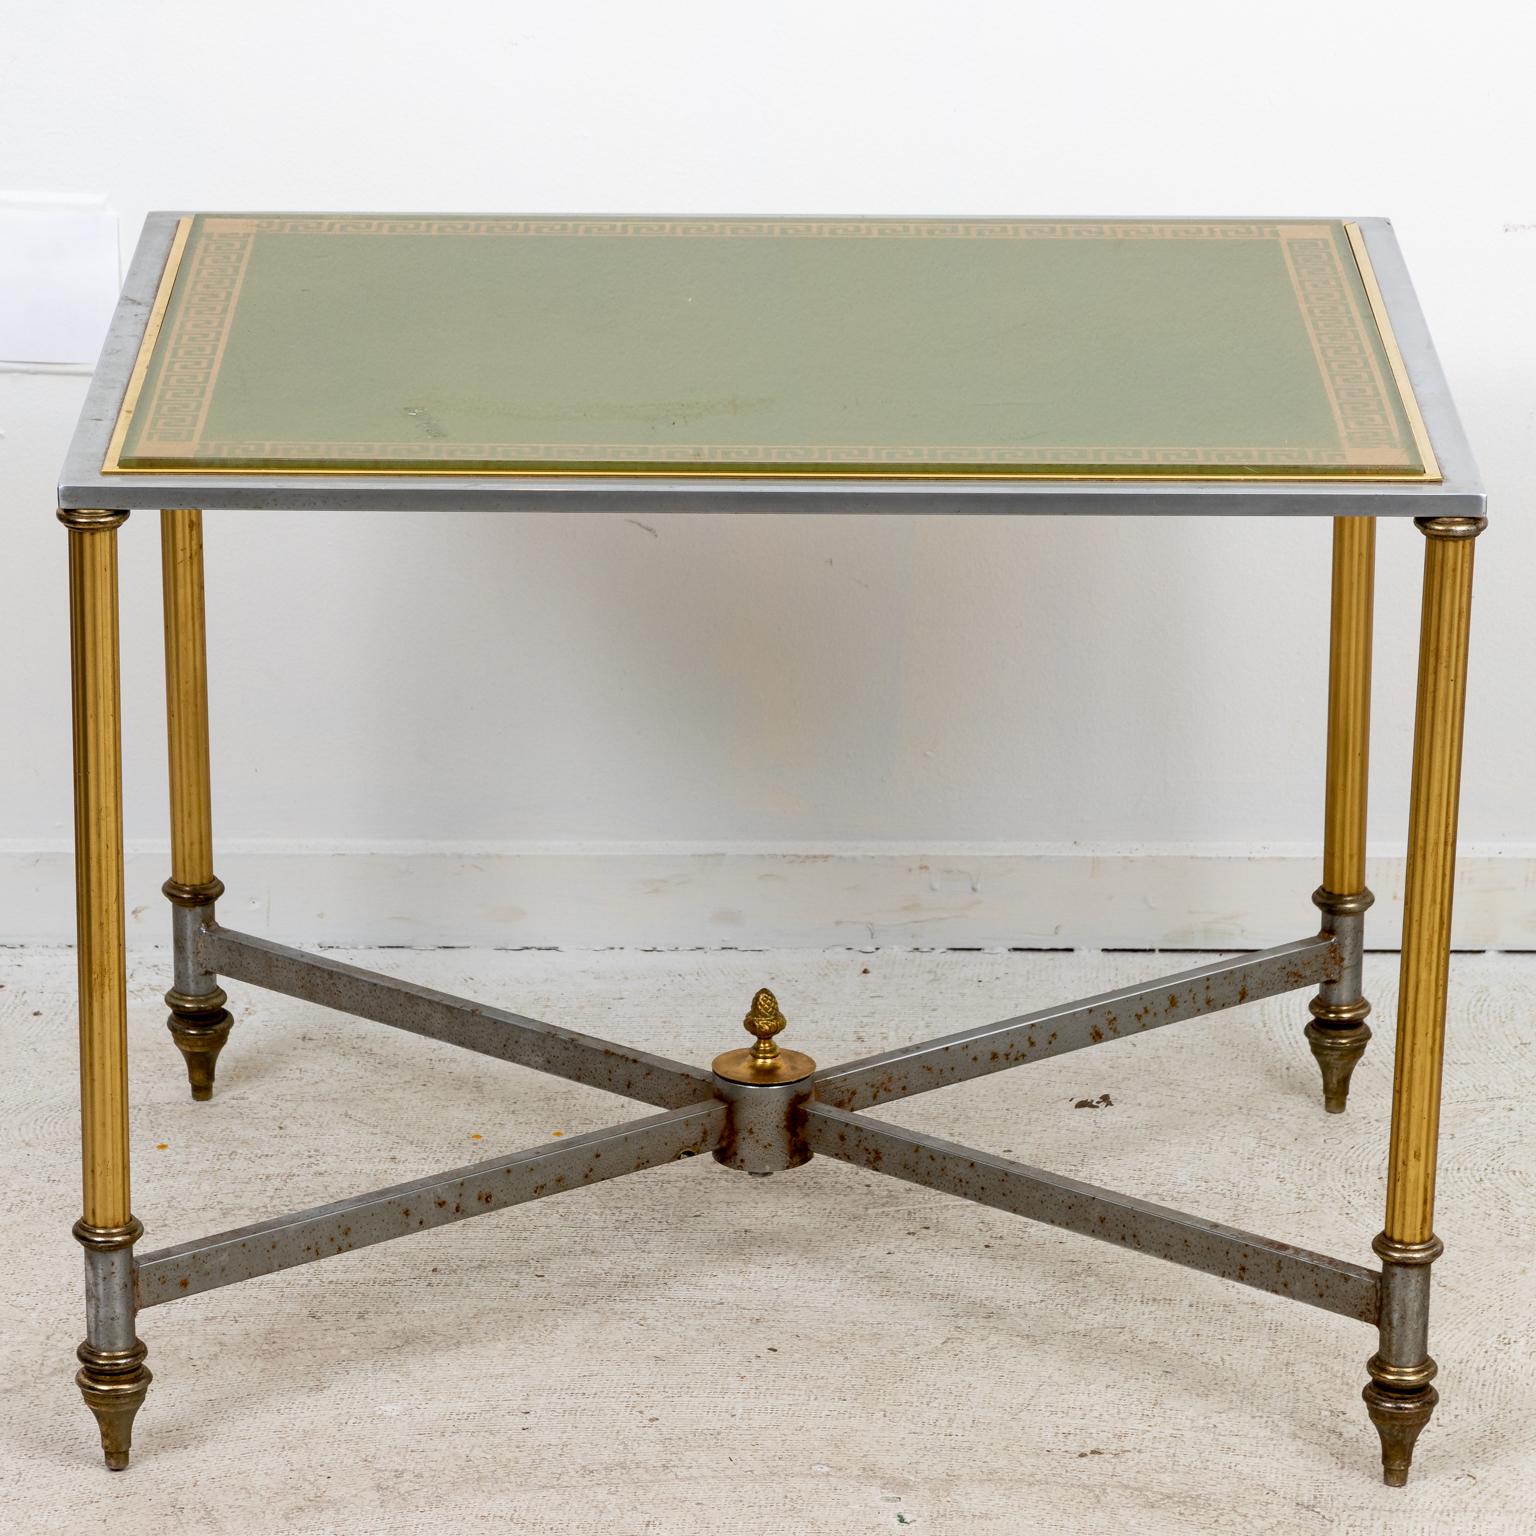 Pair of iron and brass side tables with Greek key decoration under glass top. The tables also feature x-shaped cross stretchers with center finial. Please note of wear consistent with age including patina, oxidation, and scratches to the metal.